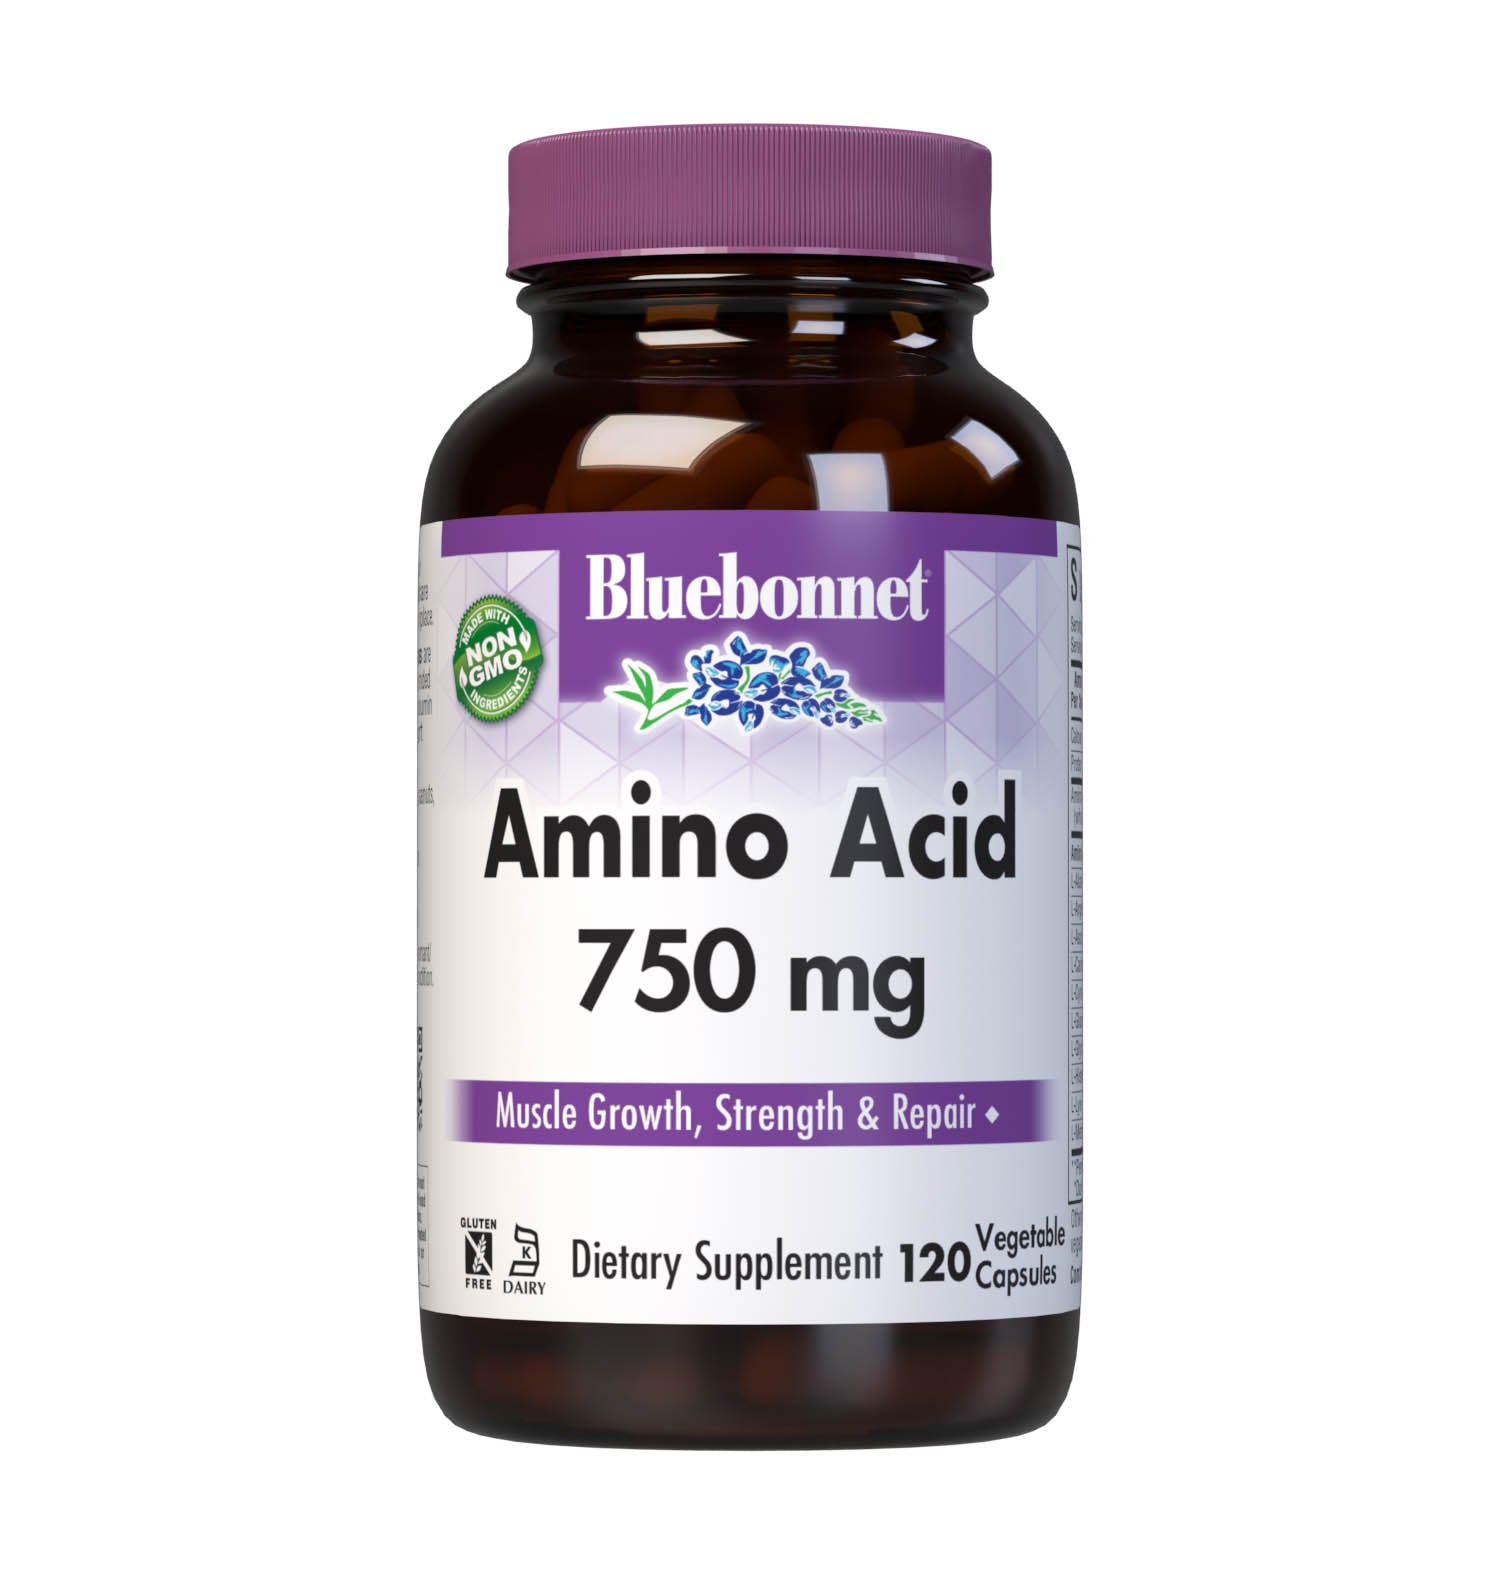 Bluebonnet’s Amino Acid 120 Vegetable Capsules are formulated with amino acids and dipeptide bonded amino acids derived entirely from whey lactalbumin and egg white albumin proteins for muscle growth, strength and repair. #size_120 count